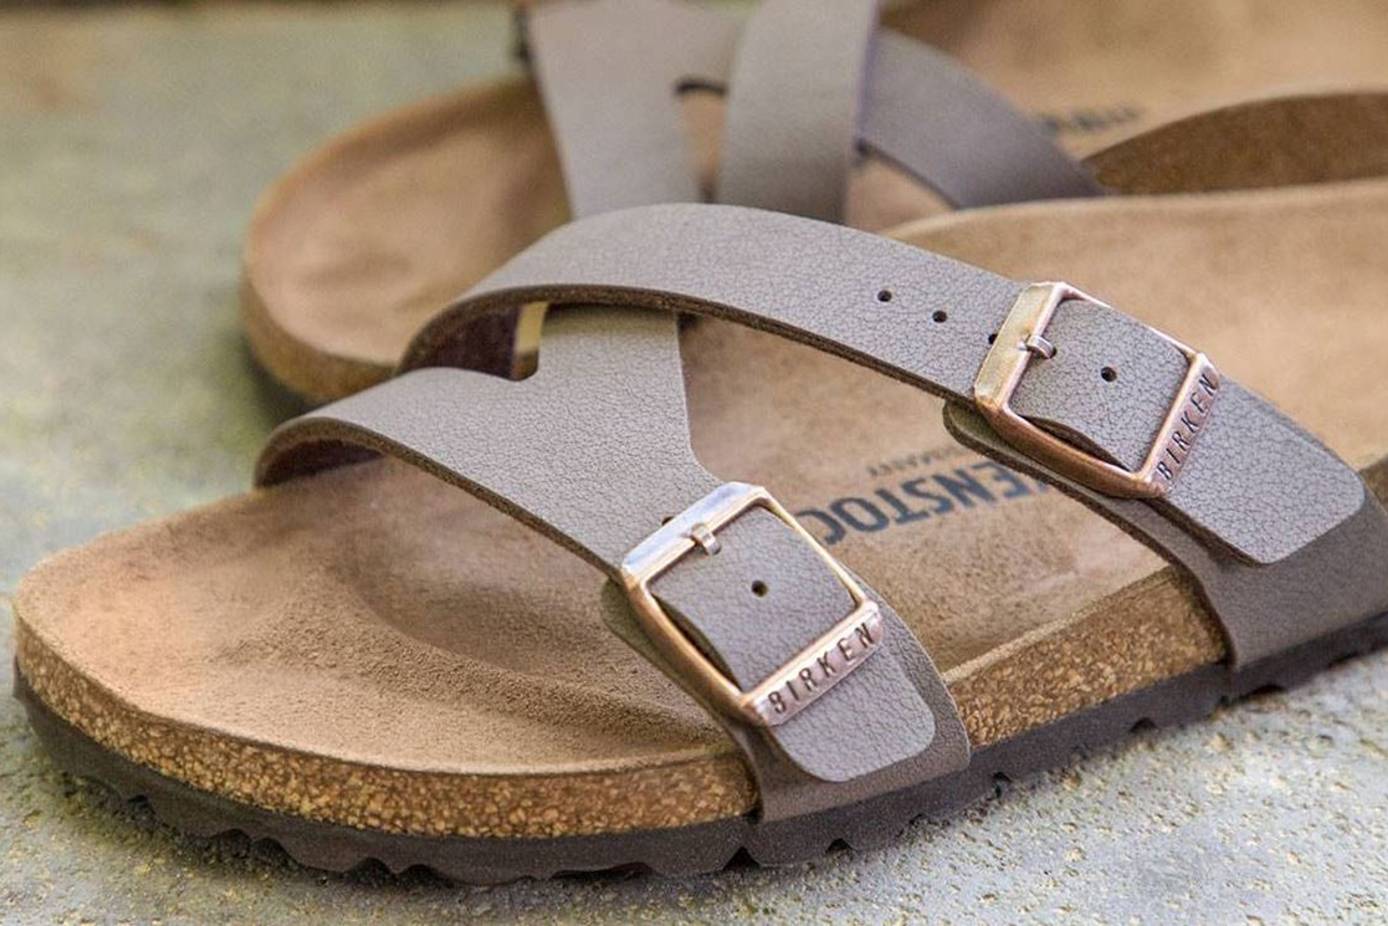 Birkenstock to be acquired by L Catterton